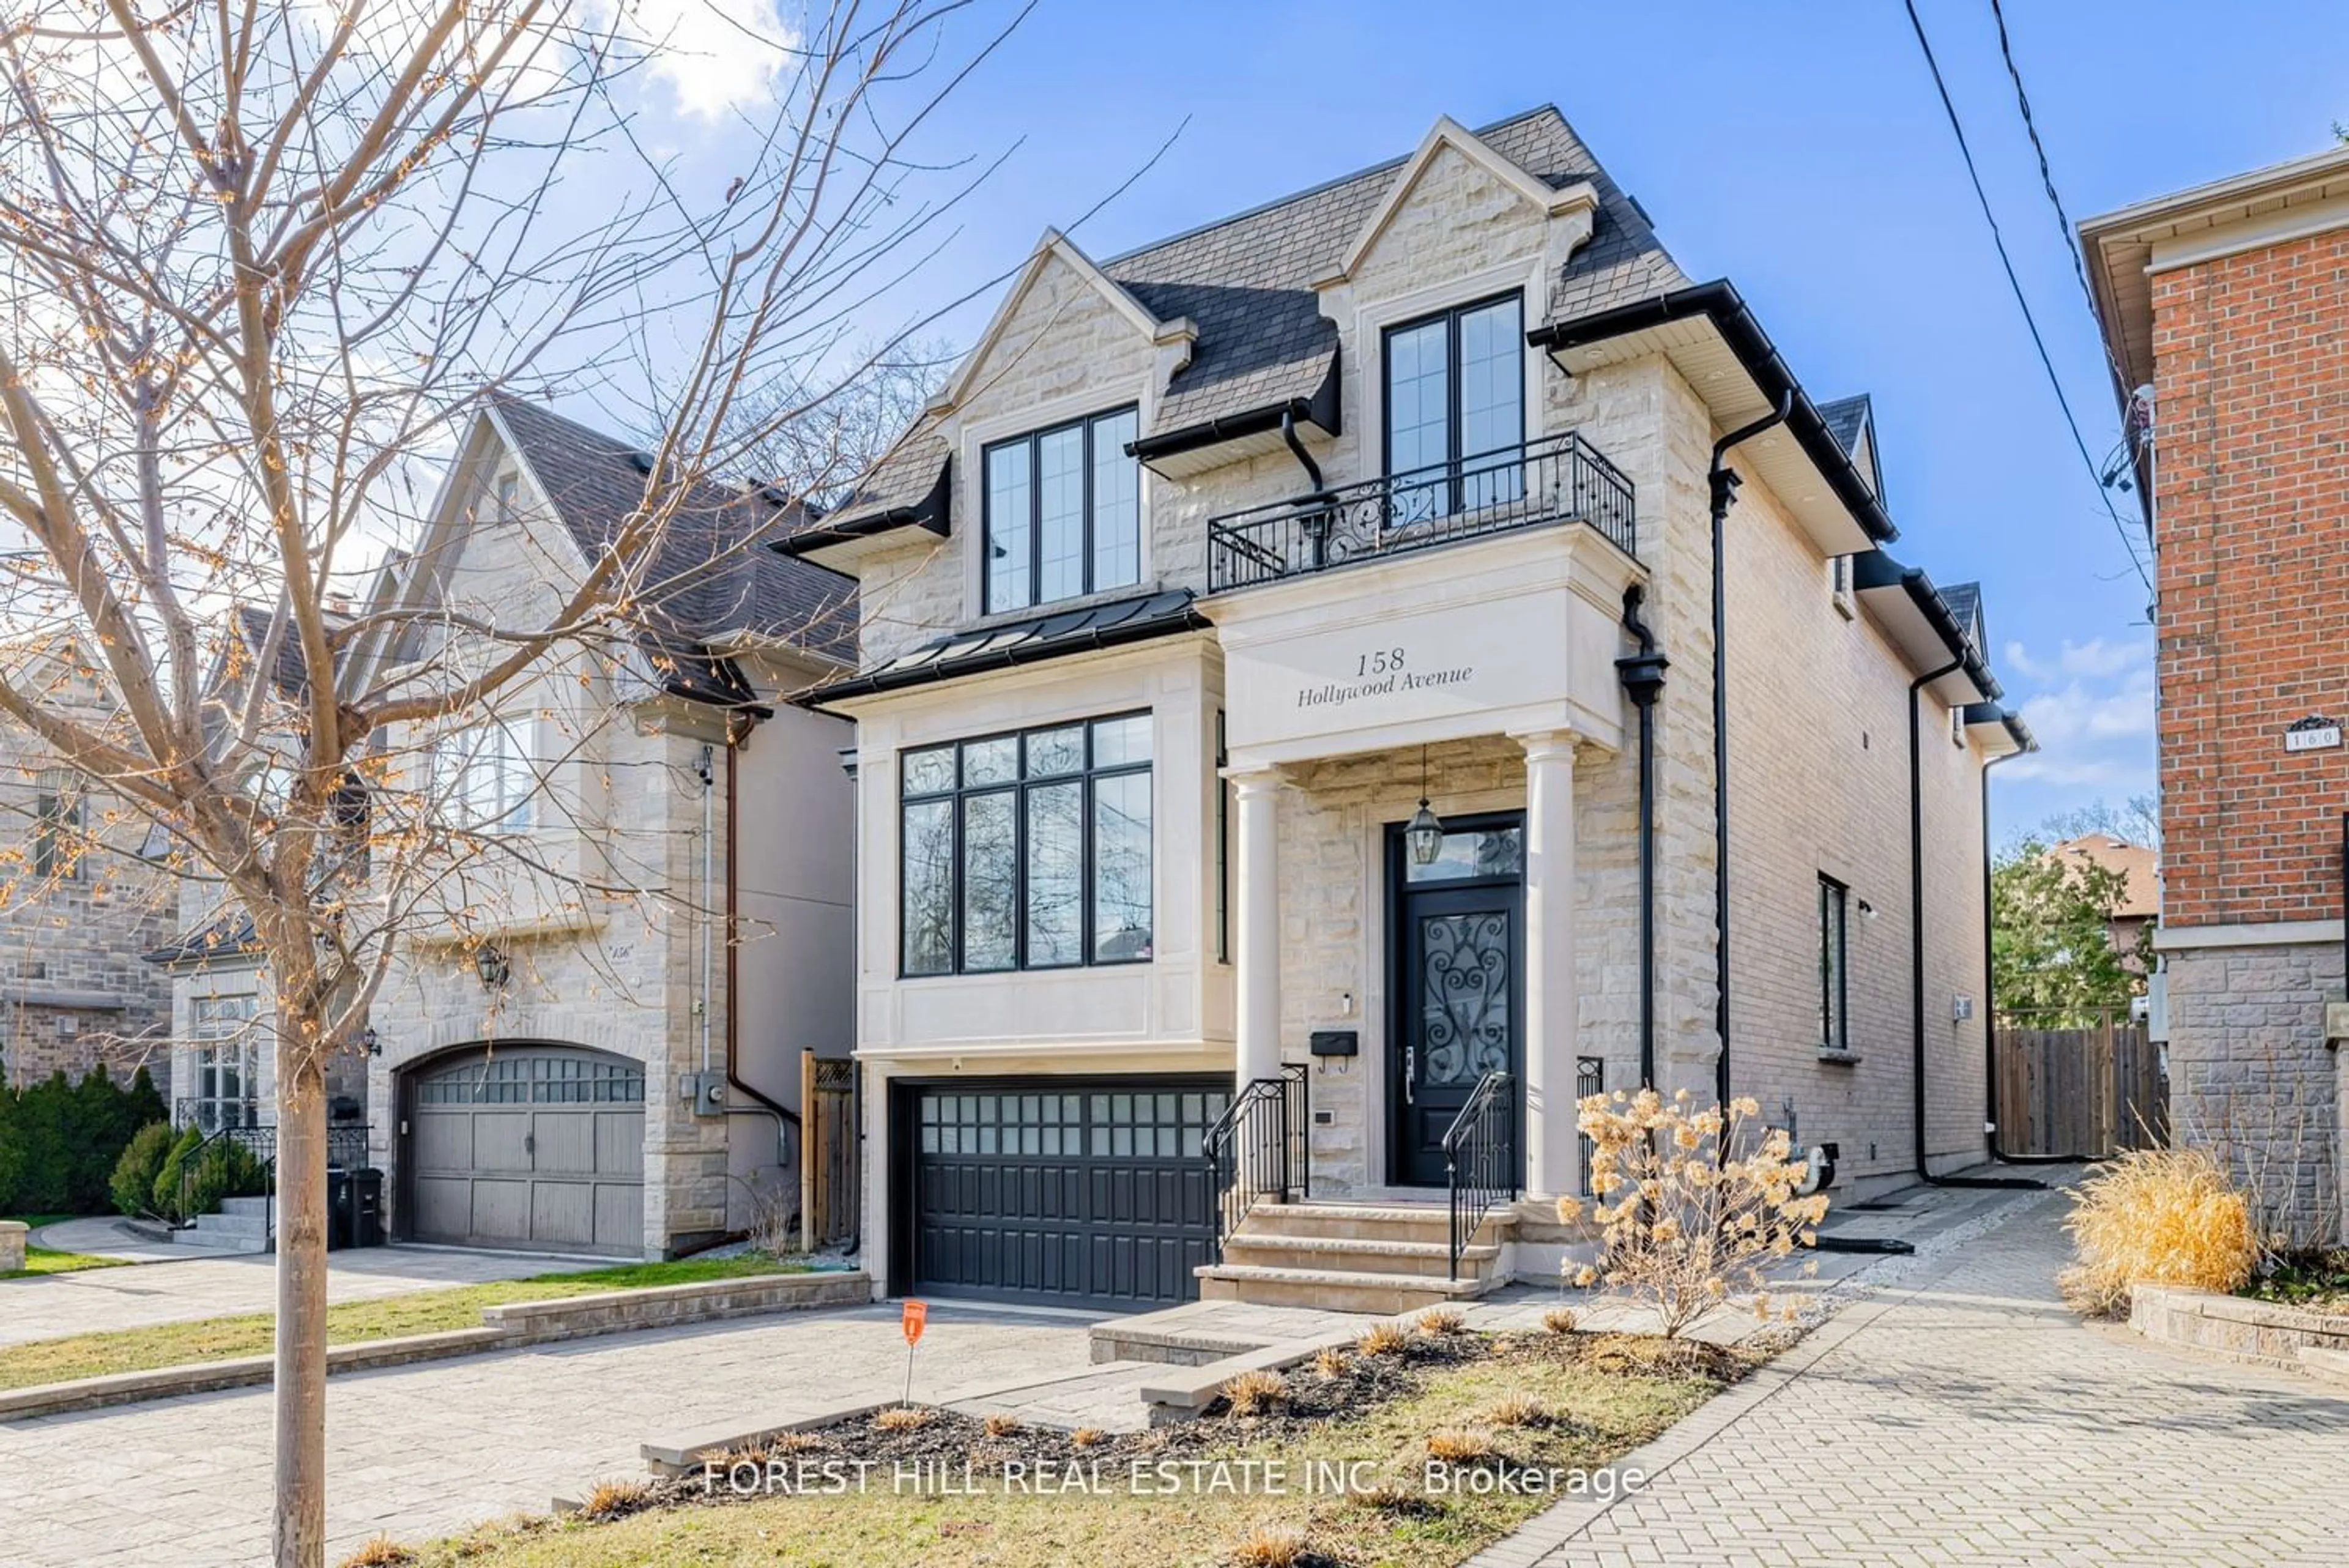 Home with brick exterior material for 158 Hollywood Ave, Toronto Ontario M2N 3K5